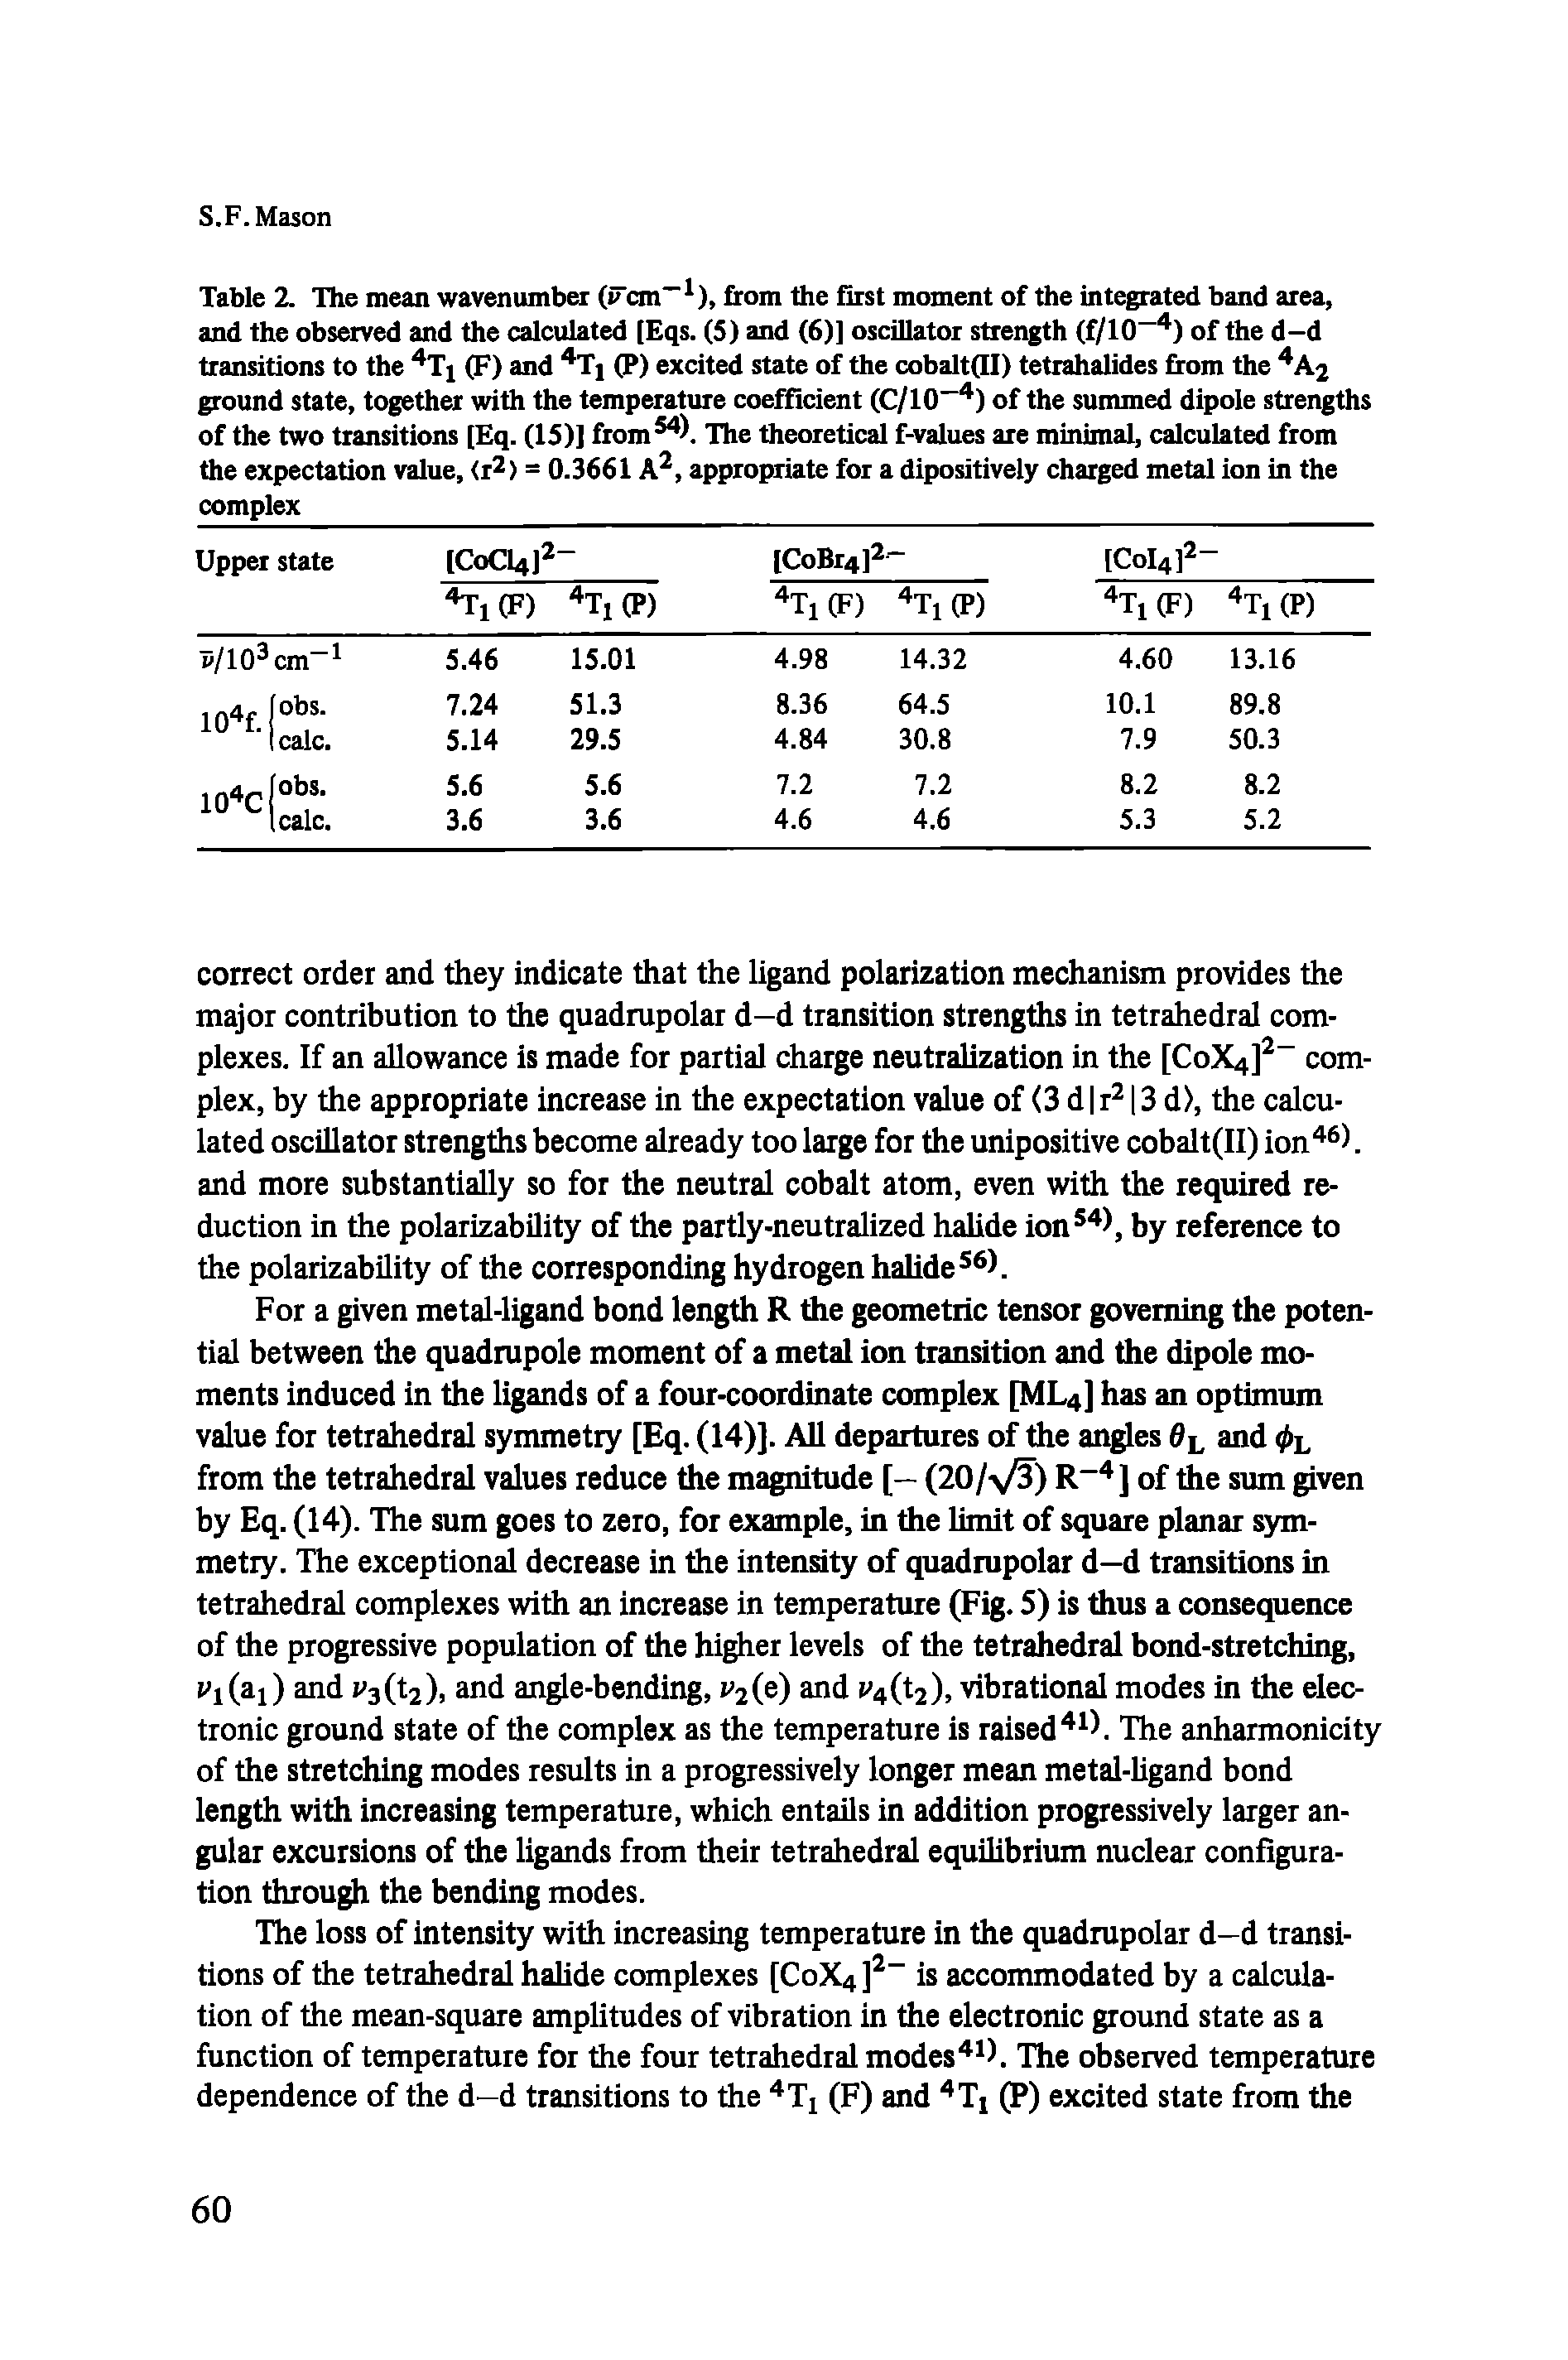 Table 2. The mean wavenumber (ircm ), from the first moment of the integrated band area, and the observed and the calculated [Eqs. (5) and (6)] oscillator strength (f/10 ) of the d-d transitions to the Ti (F) and Ti (P) excited state of the cobalt(II) tetrahalides from the A2 ground state, together with the temperature coefficient (C/10 ) of the summed dipole strengths of the two transitions [Eq. (IS)] from X The theoretical f-values are minimal, calculated from the expectation value, tr ) = 0.3661 A, appropriate for a dipositively charged metal ion in the complex...